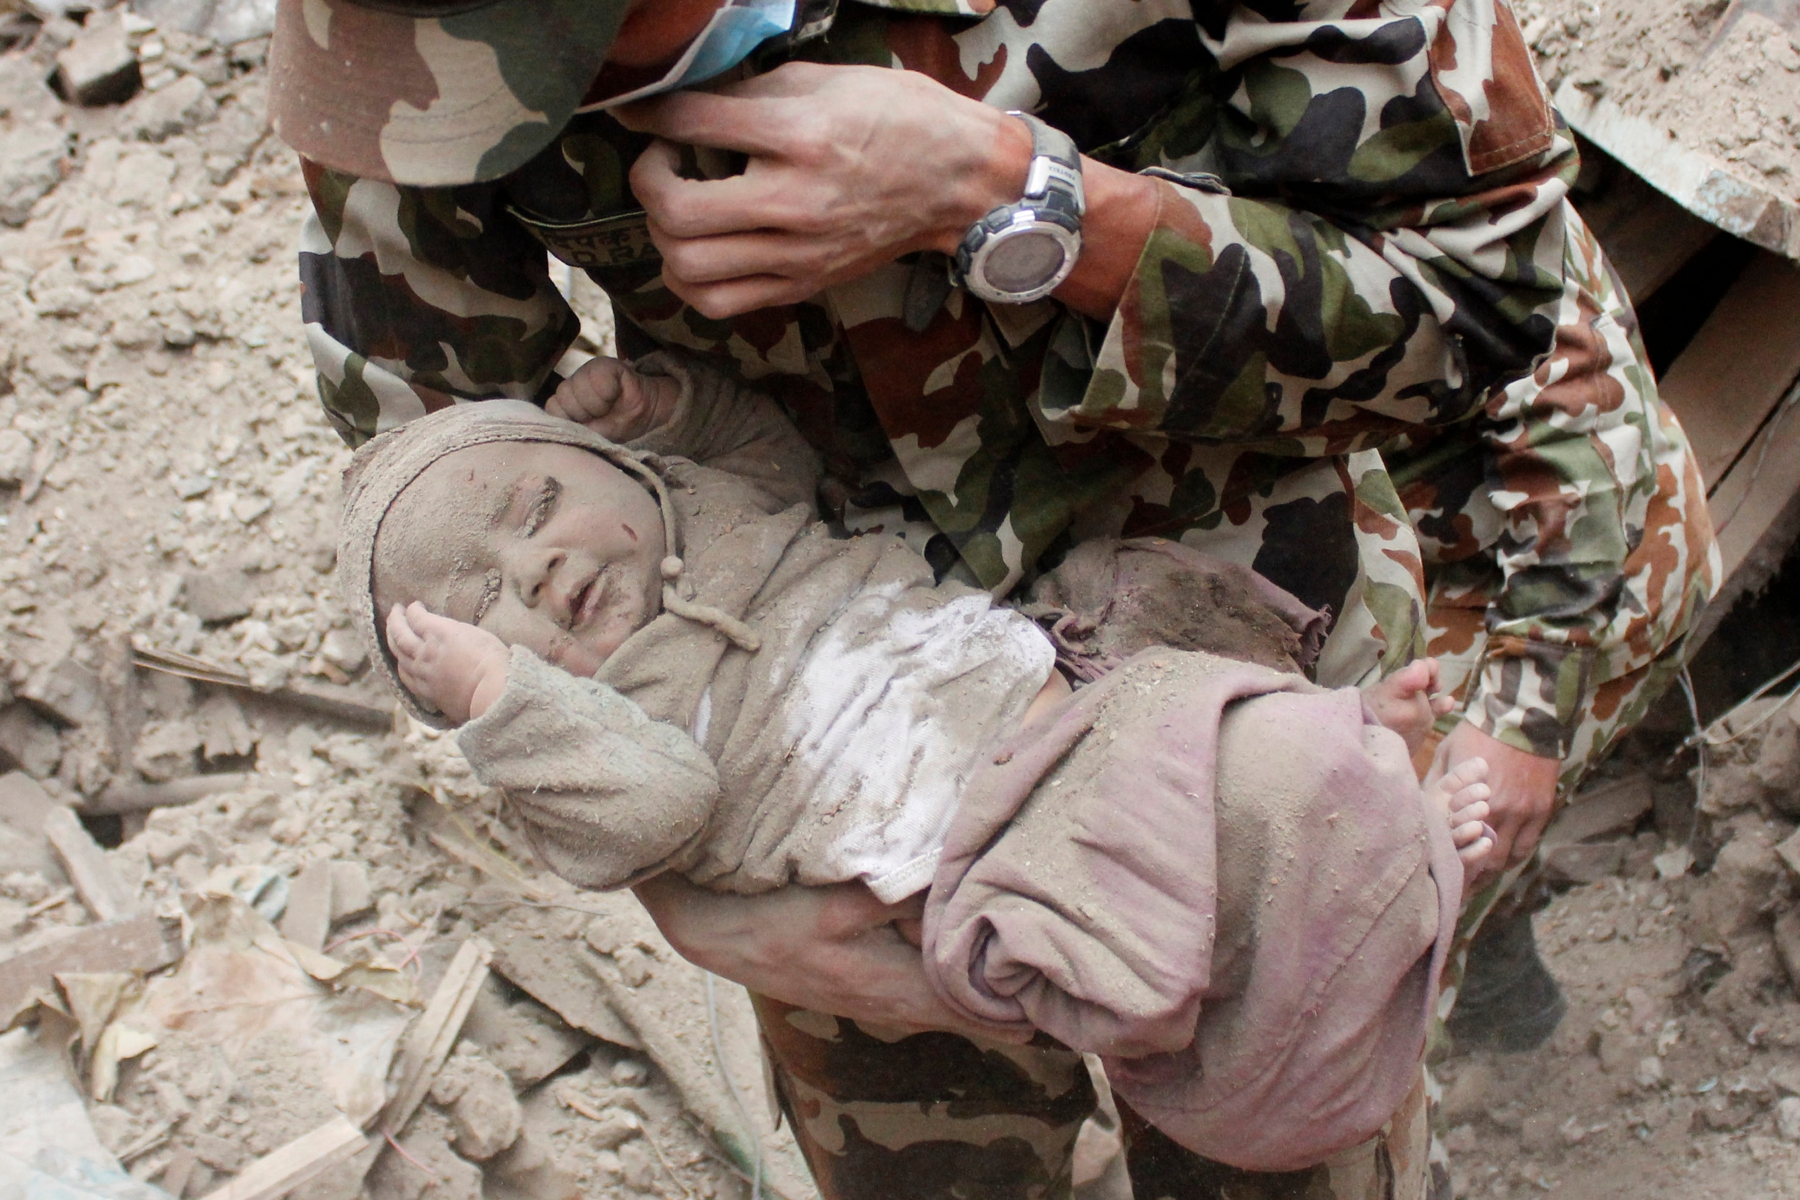 In this Sunday, April 26, 2015, photo taken by Amul Thapa and provided by KathmanduToday.com, four-month-old baby boy Sonit Awal is held up by Nepalese Army soldiers after being rescued from the rubble of his house in Bhaktapur, Nepal, after Saturday's 7.8-magnitude earthquake shook the densely populated Kathmandu valley.  Thapa says that when he saw the baby alive after 20 hours of rescue efforts ÏÖ all my sorrow went. Everyone was clapping. It gave me energy and made me smile in spite of lots of pain hidden inside me." (Amul Thapa/KathmanduToday.com via AP)Sonis Awal âgé de 4 mois, a survécu après avoir passé 22 heures sous les décombres. Nepal Earthquake Baby Rescue